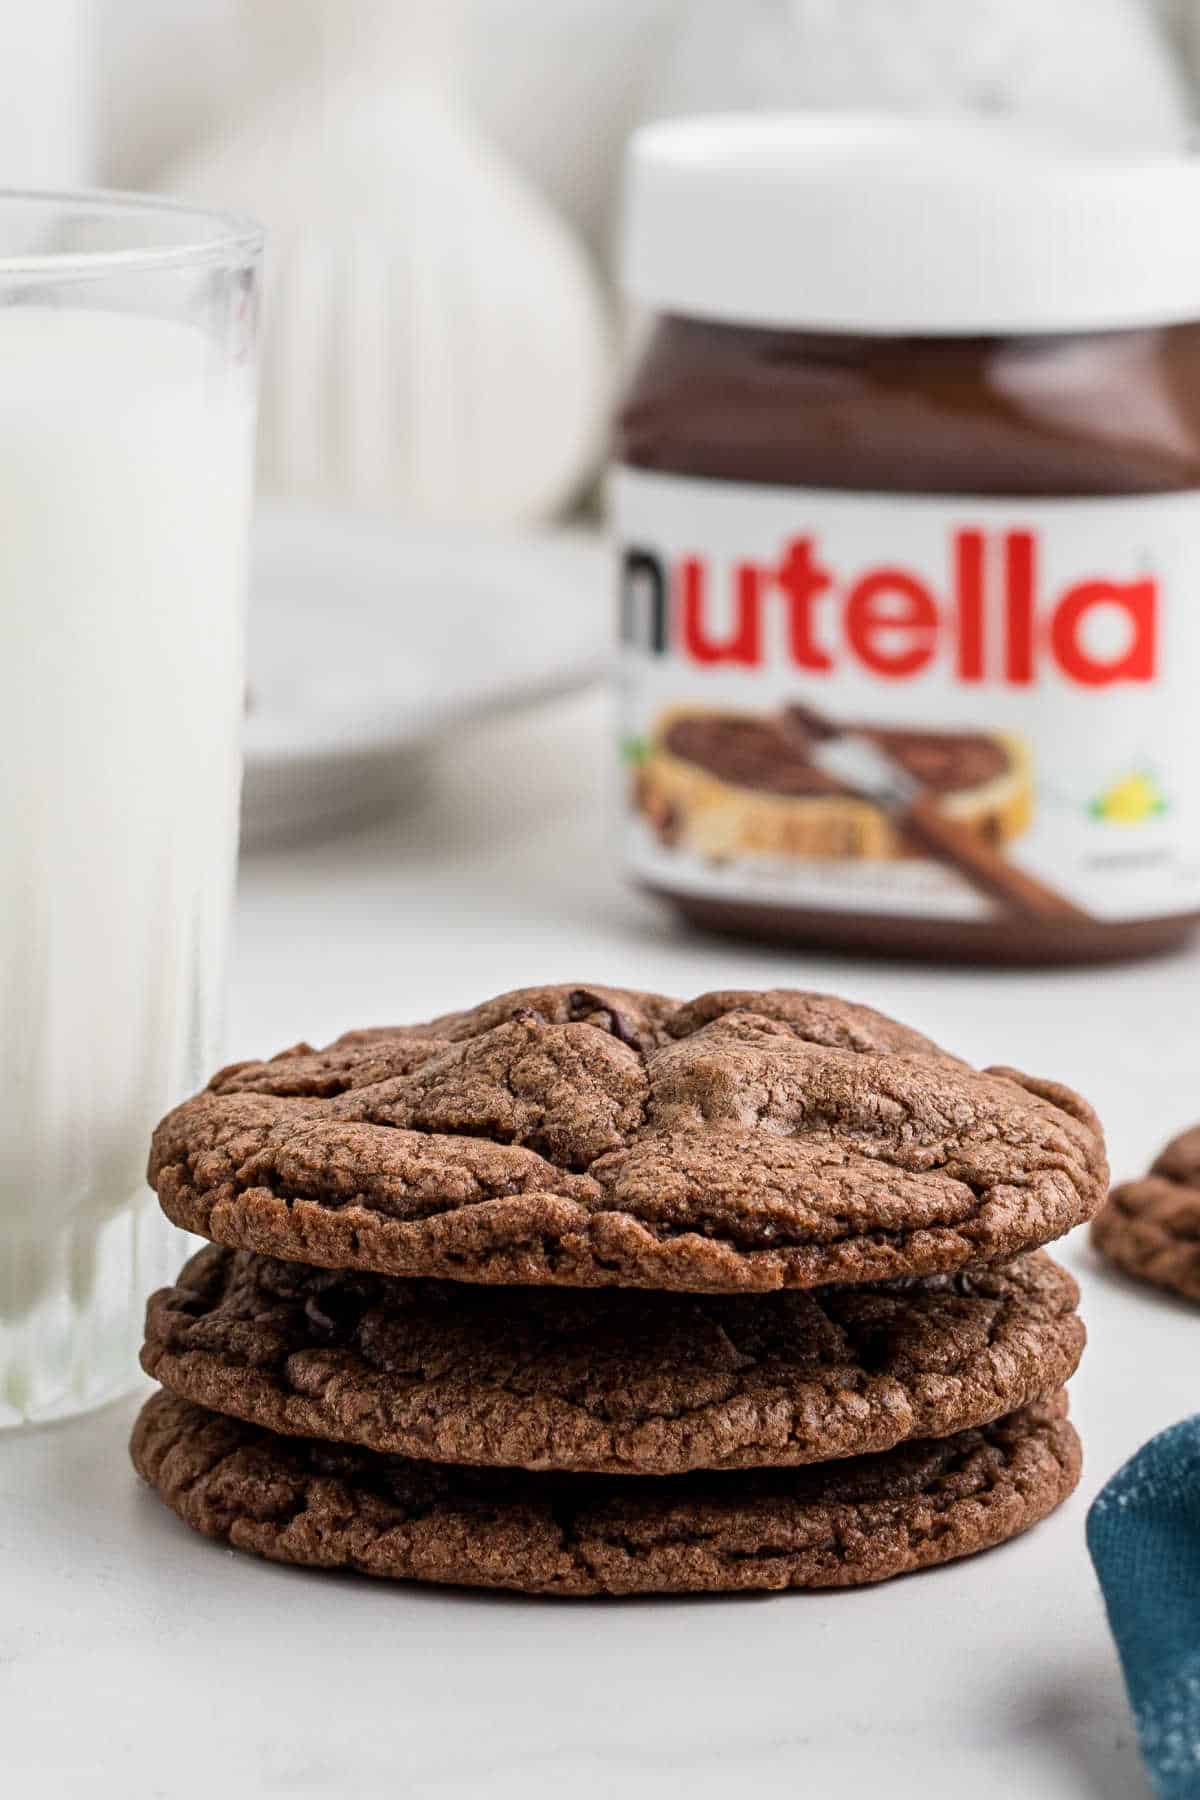 3 Nutella brownie cookies in a stack, with a jar of Nutella in the back.